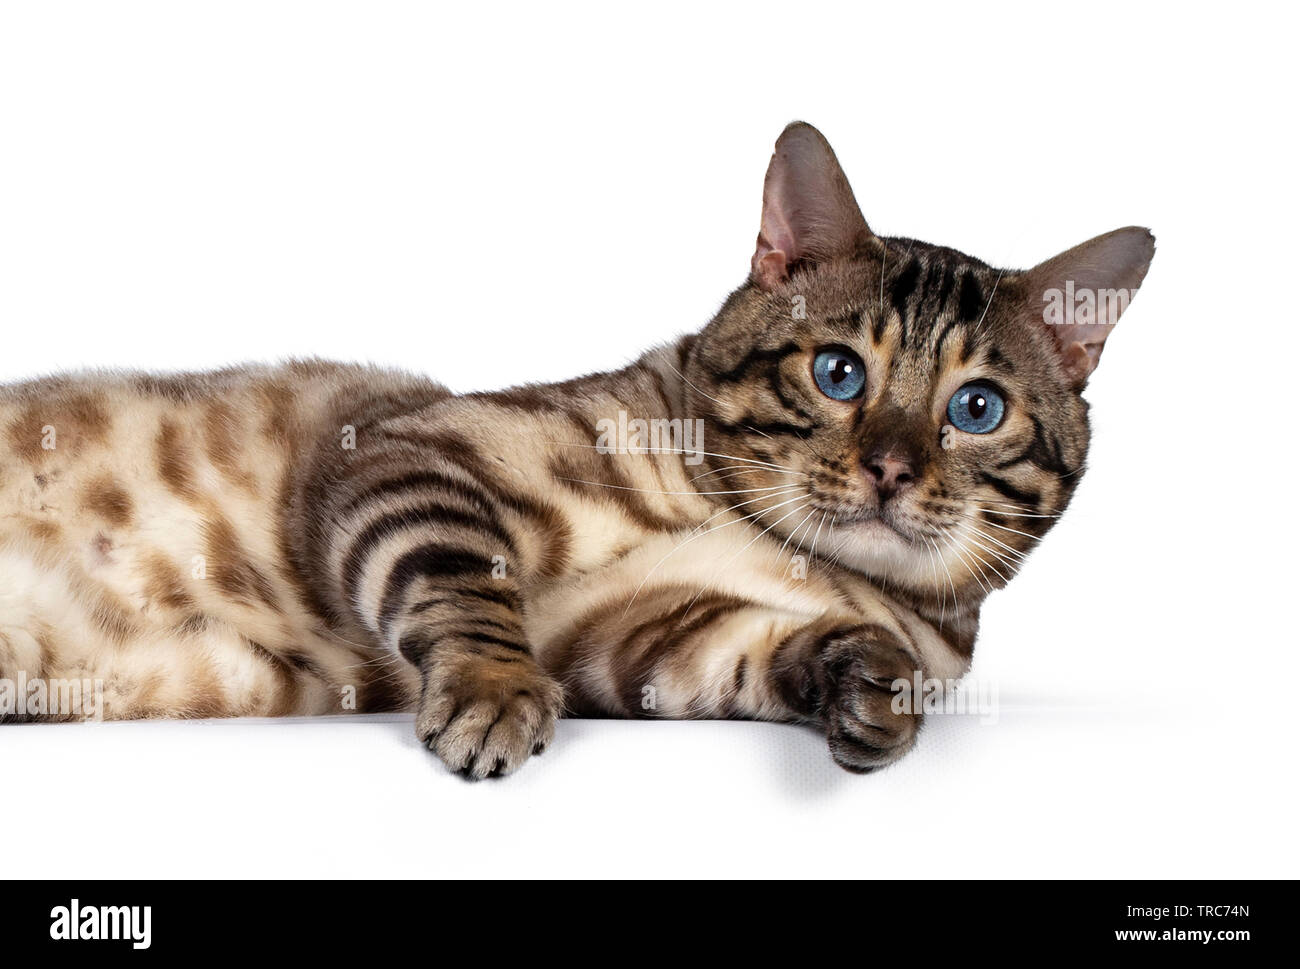 Head shot of gorgeous Snow Bengal, laying on it's side. Looking at camera with deep blue eyes. Isolated on white background. Stock Photo